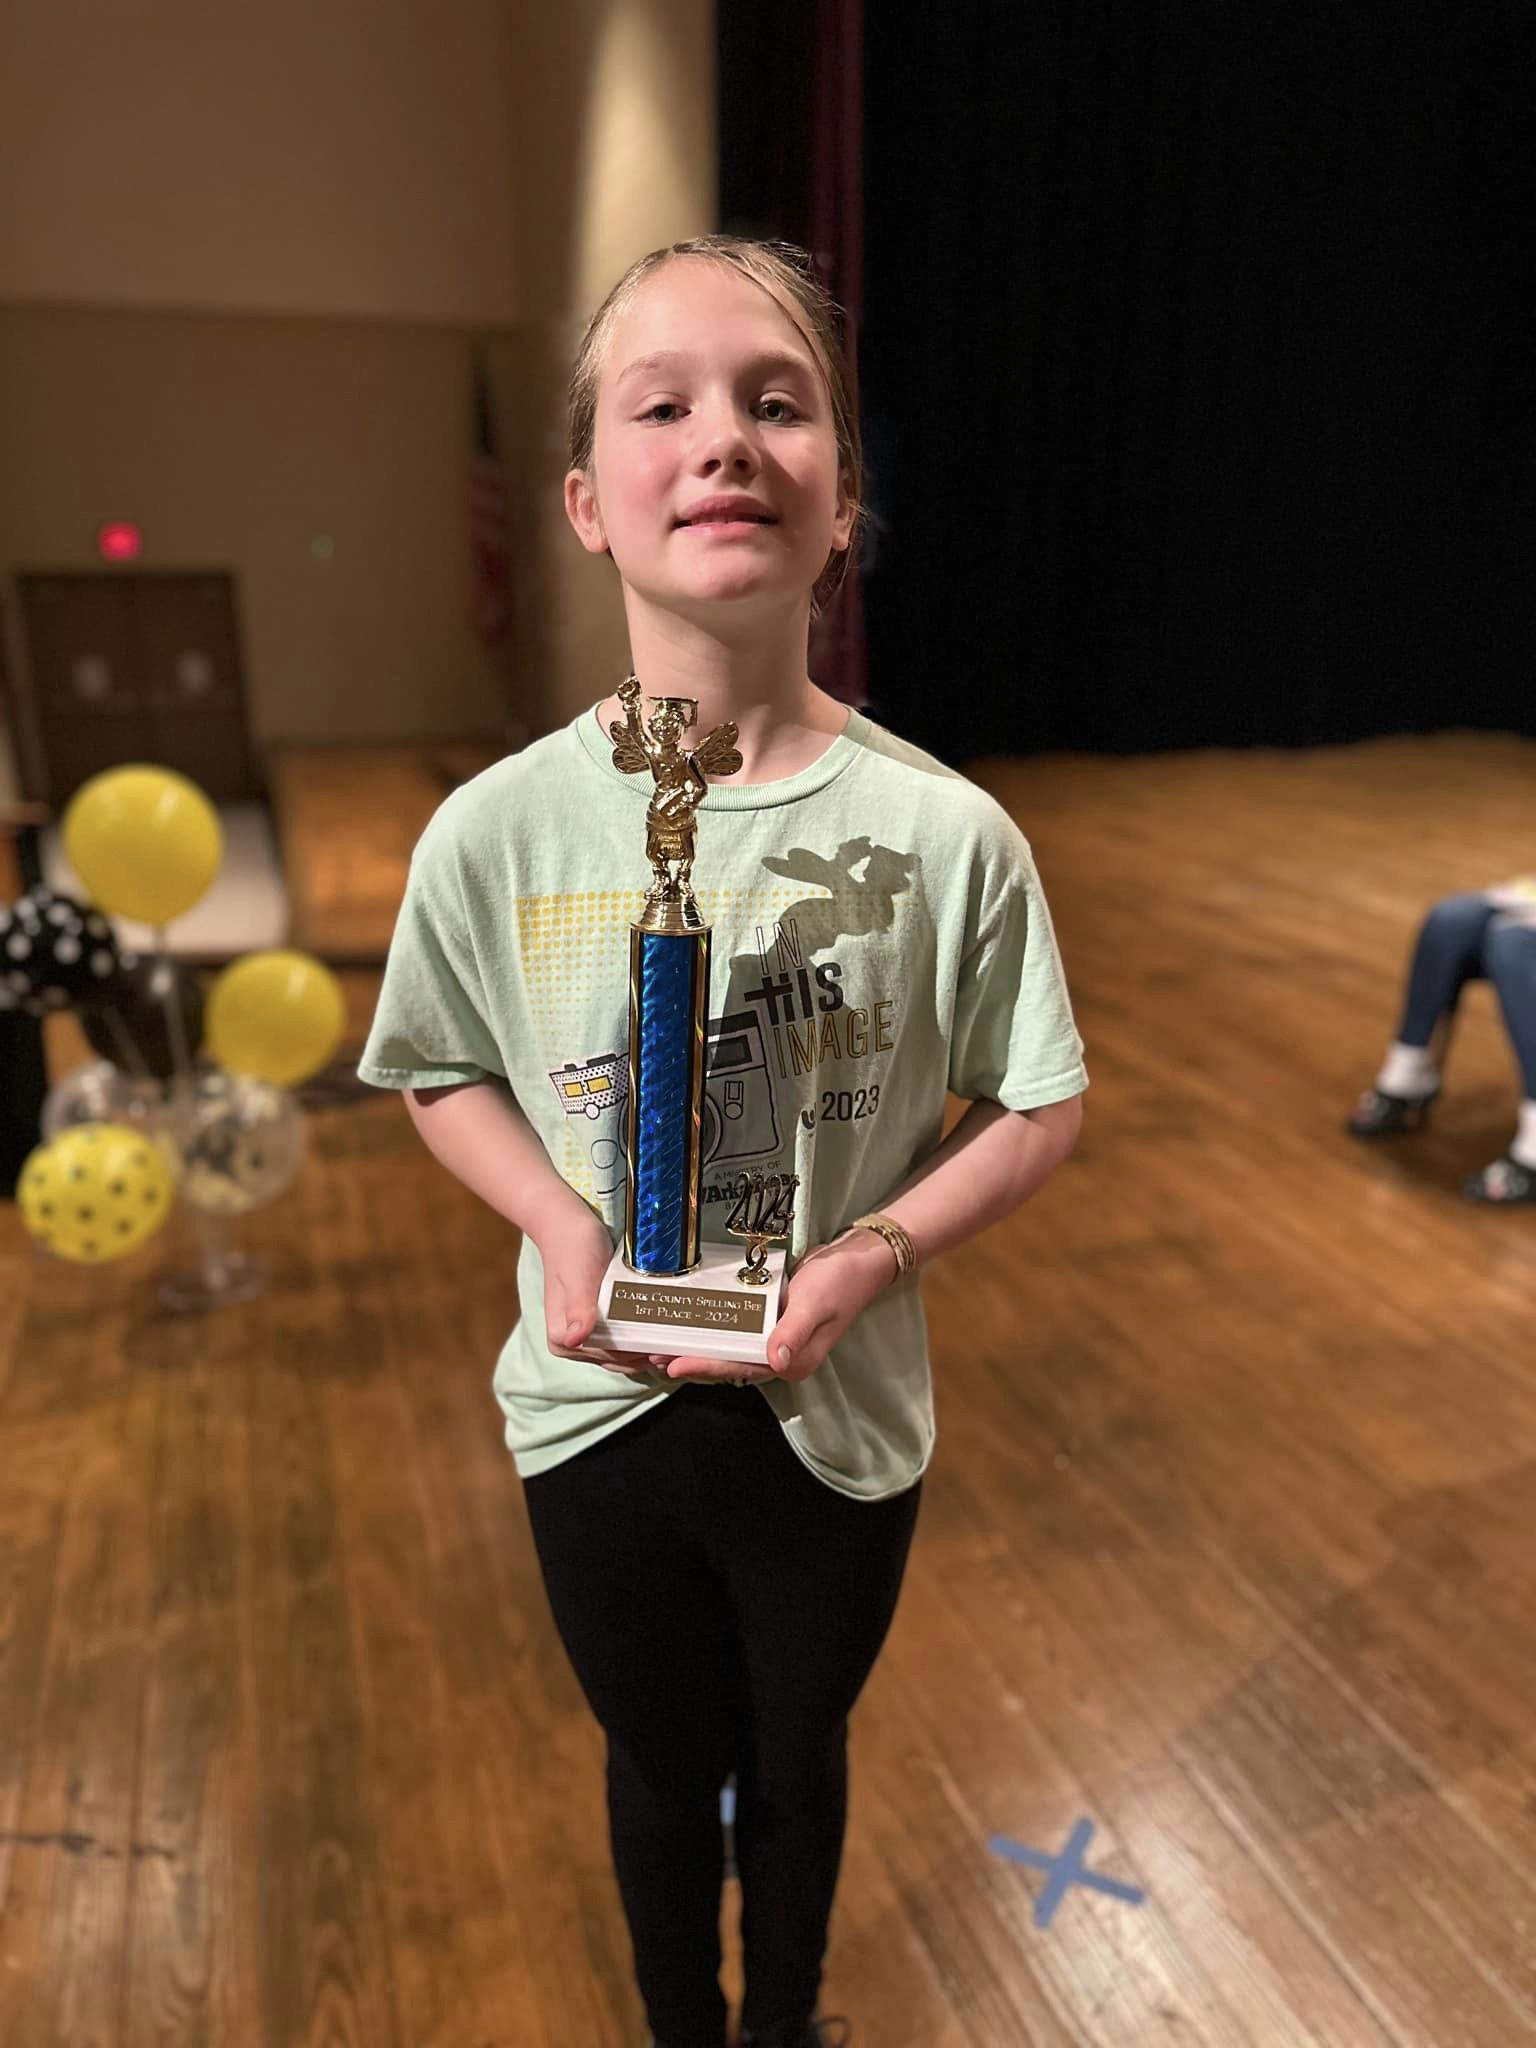 Georgia holding her trophy